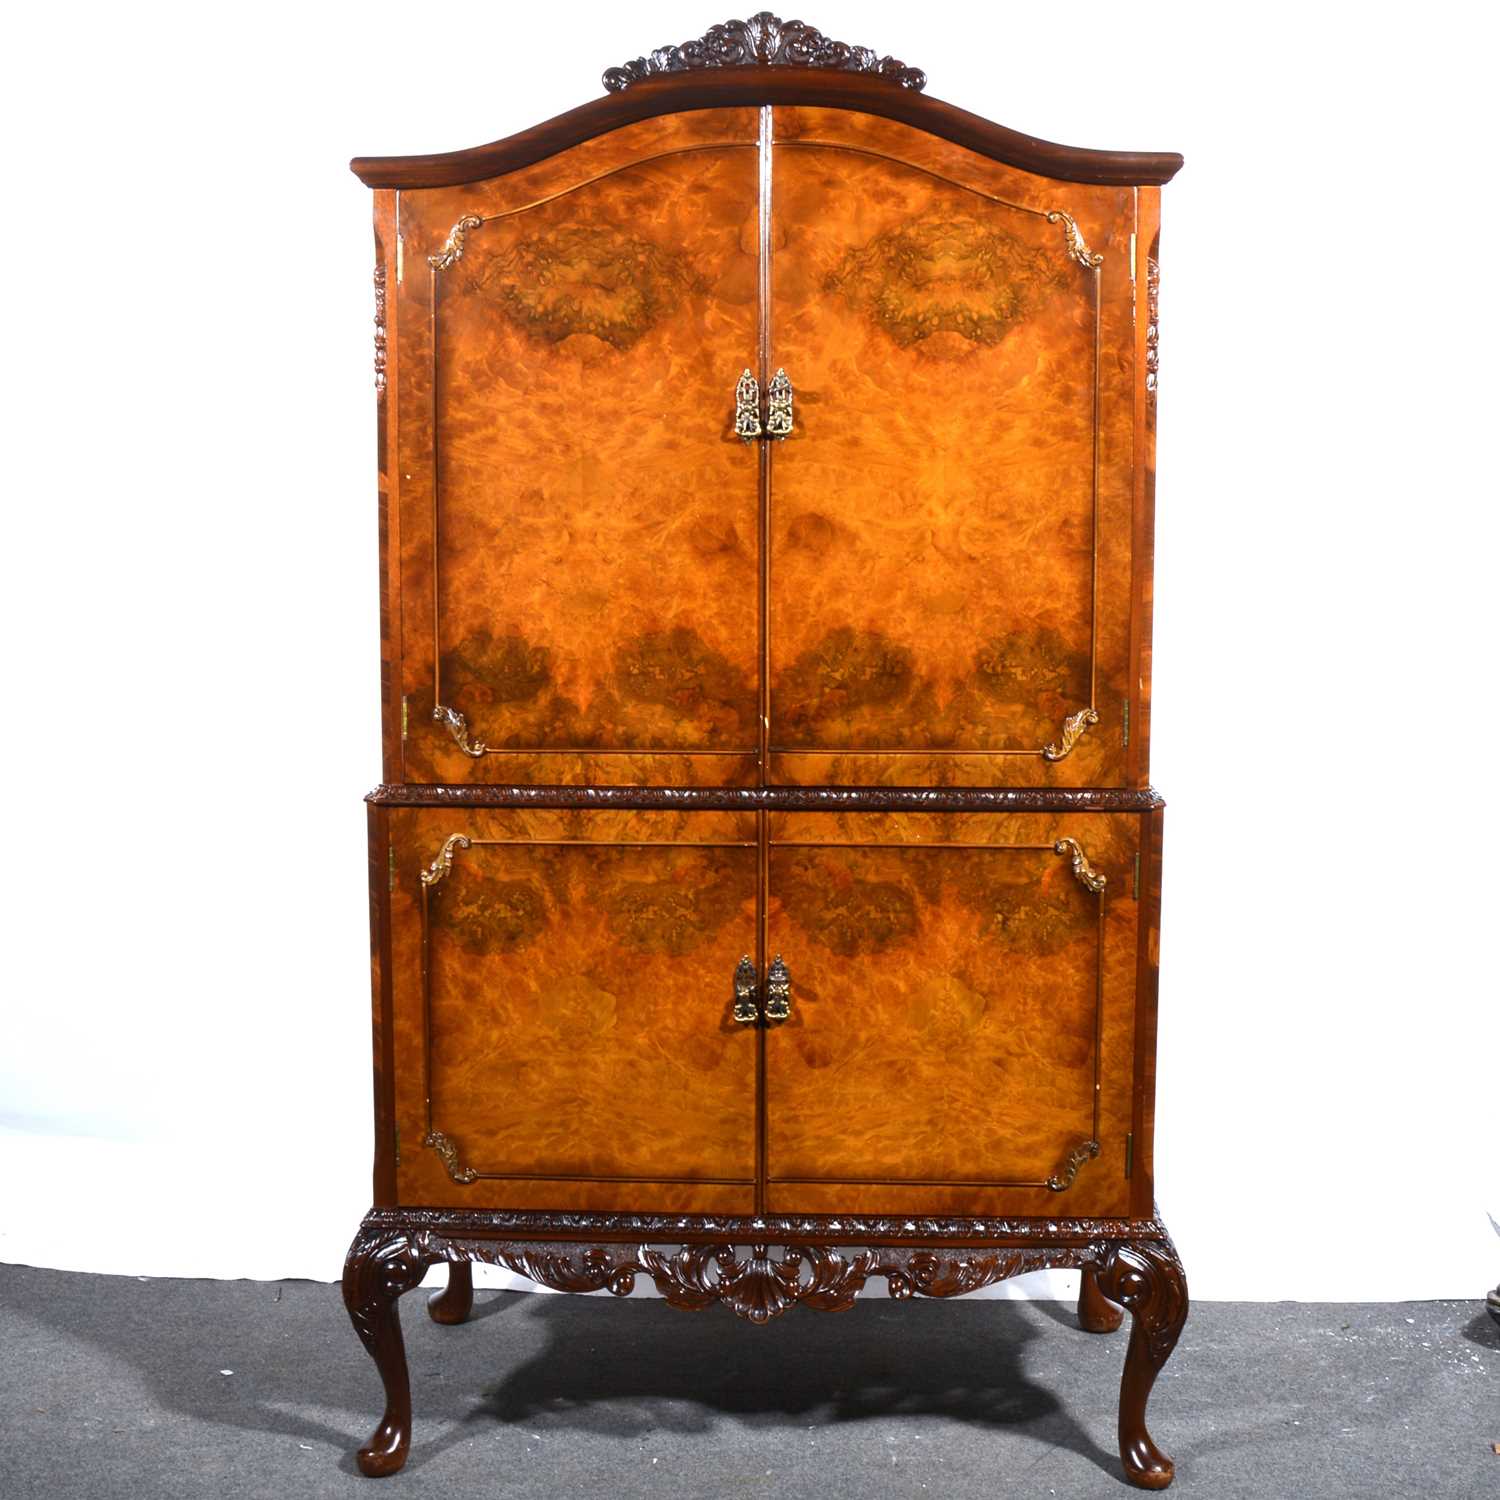 Lot 48 - A reproduction burr walnut cocktail cabinet, Queen Anne style.